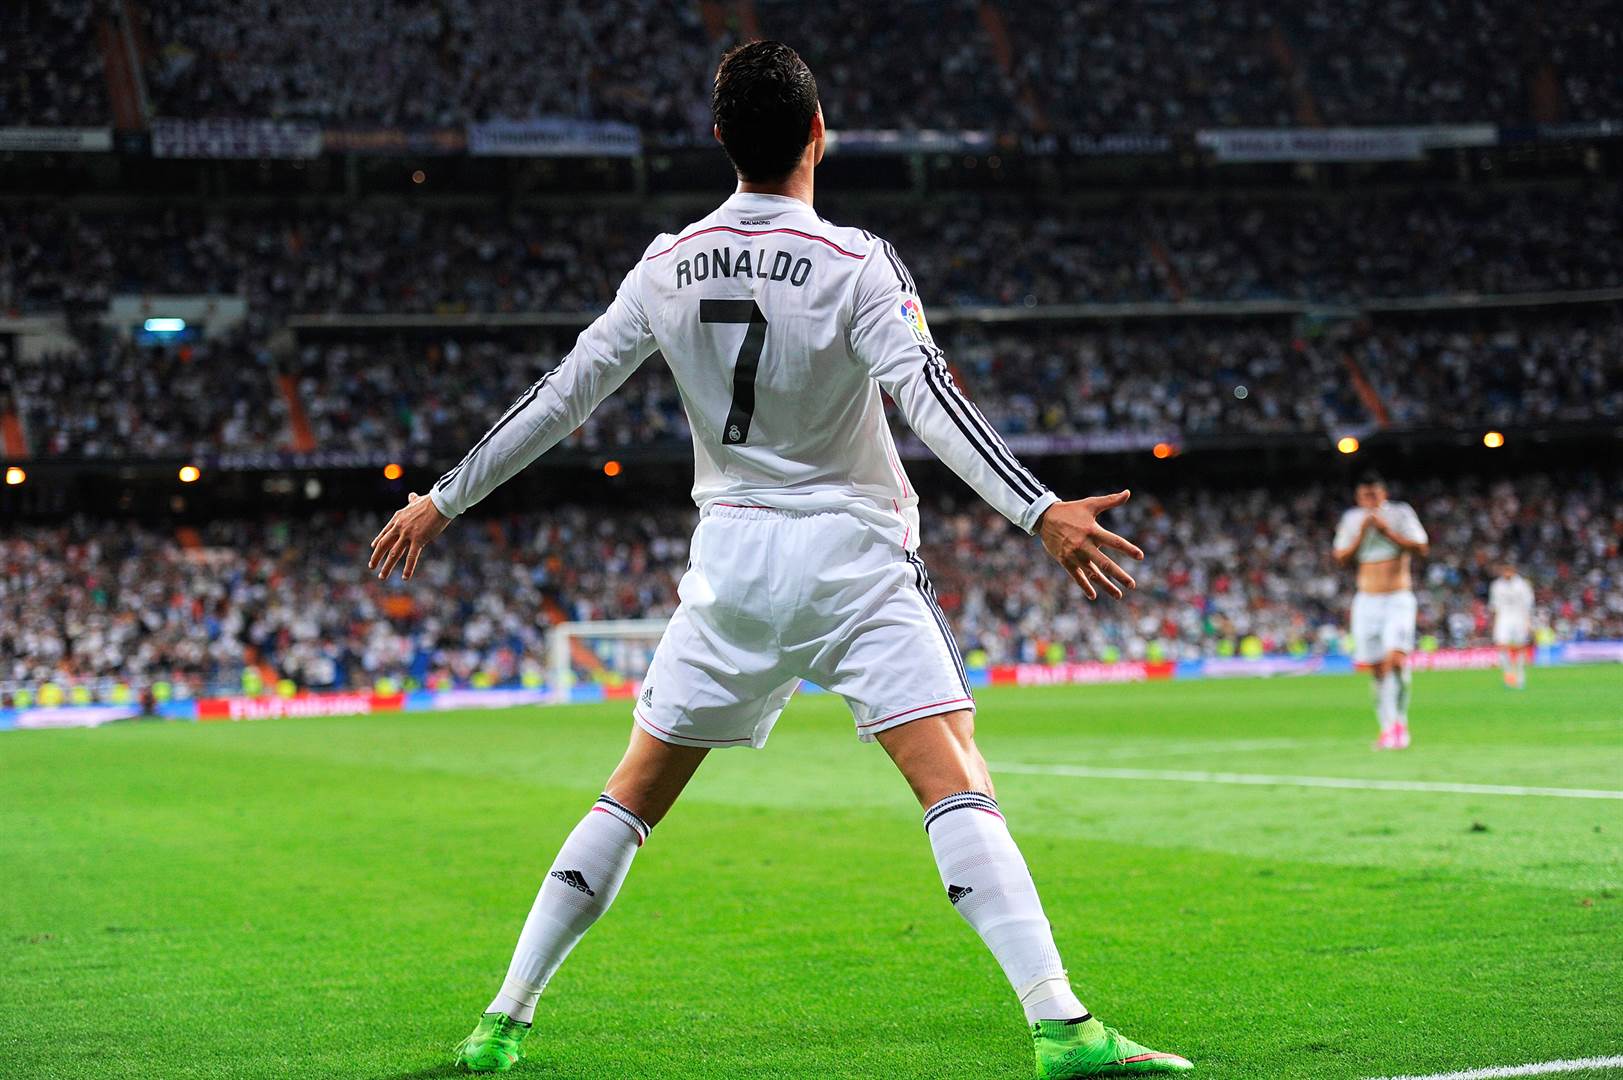 13,548 Cristiano Ronaldo Royalty-Free Photos and Stock Images | Shutterstock